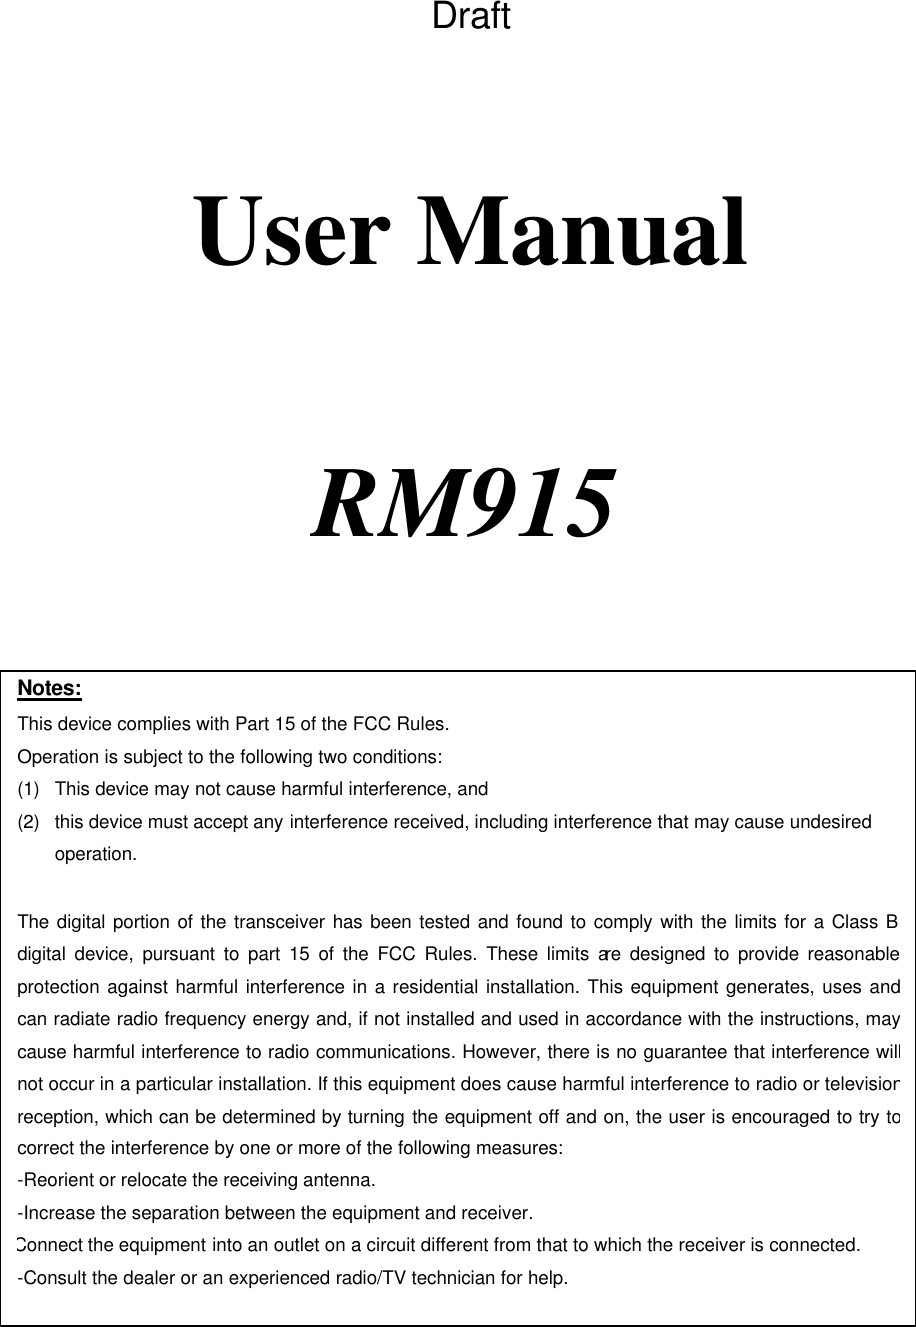   Draft    User Manual                RM915    Notes: This device complies with Part 15 of the FCC Rules. Operation is subject to the following two conditions: (1) This device may not cause harmful interference, and (2) this device must accept any interference received, including interference that may cause undesired operation.  The digital portion of the transceiver has been tested and found to comply with the limits for a Class B digital device, pursuant to part 15 of the FCC Rules. These limits are designed to provide reasonable protection against harmful interference in a residential installation. This equipment generates, uses and can radiate radio frequency energy and, if not installed and used in accordance with the instructions, may cause harmful interference to radio communications. However, there is no guarantee that interference will not occur in a particular installation. If this equipment does cause harmful interference to radio or television reception, which can be determined by turning the equipment off and on, the user is encouraged to try to correct the interference by one or more of the following measures:  -Reorient or relocate the receiving antenna. -Increase the separation between the equipment and receiver. Connect the equipment into an outlet on a circuit different from that to which the receiver is connected. -Consult the dealer or an experienced radio/TV technician for help.  